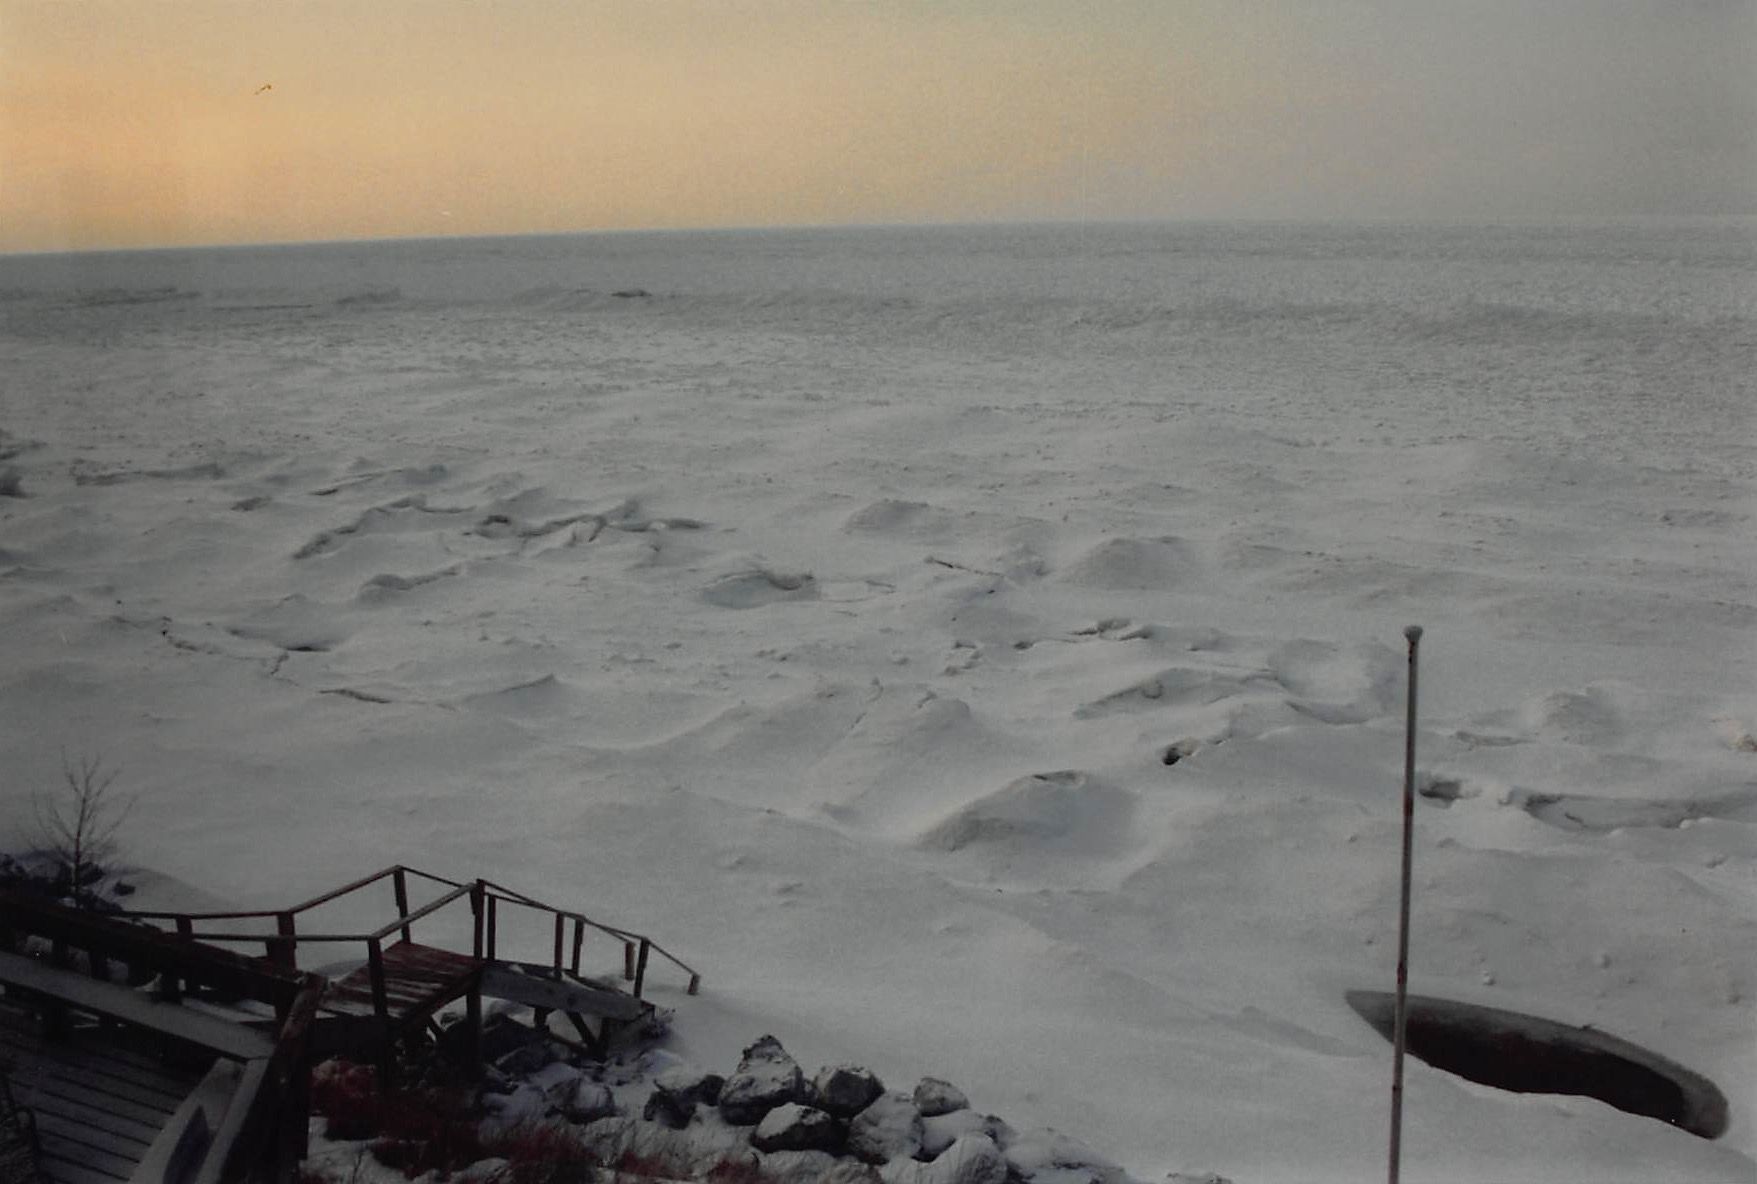 This is a photo of the ice shelf extending out from the beach at Nancy Schwab's vacation home in the early 1990s. As the Earth warms, that ice shelf is not there to protect the beaches and dunes along Lake Michigan from erosion. Courtesy of Nancy Schwab.